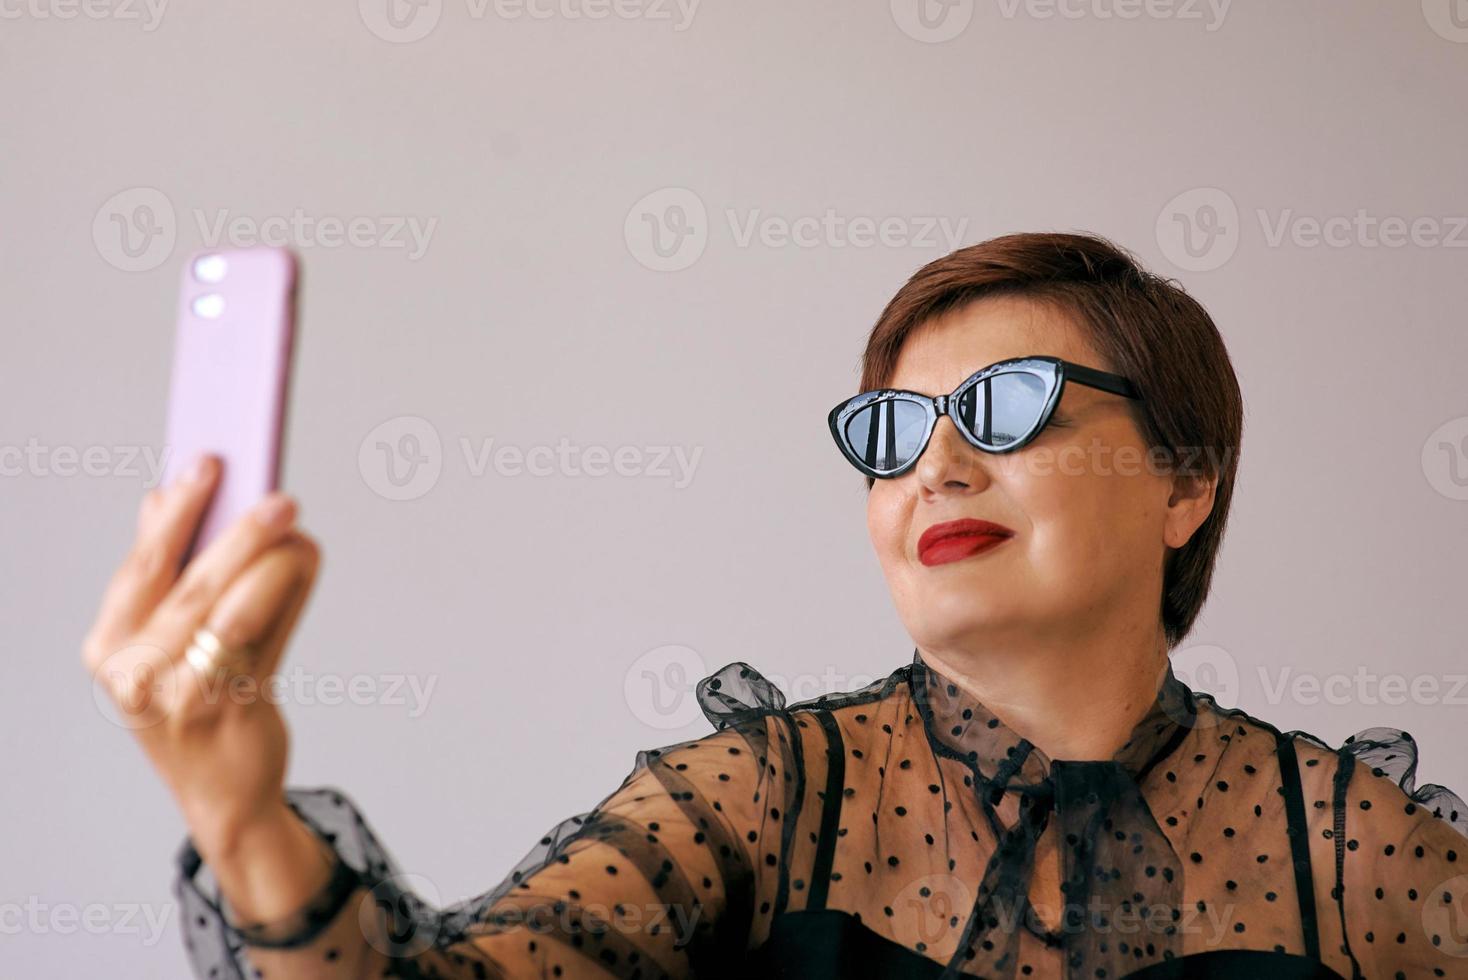 stylish mature senior woman in red blouse with cellphone video calling or making selfie. Fun, party, style, lifestyle, technology, celebration concept photo